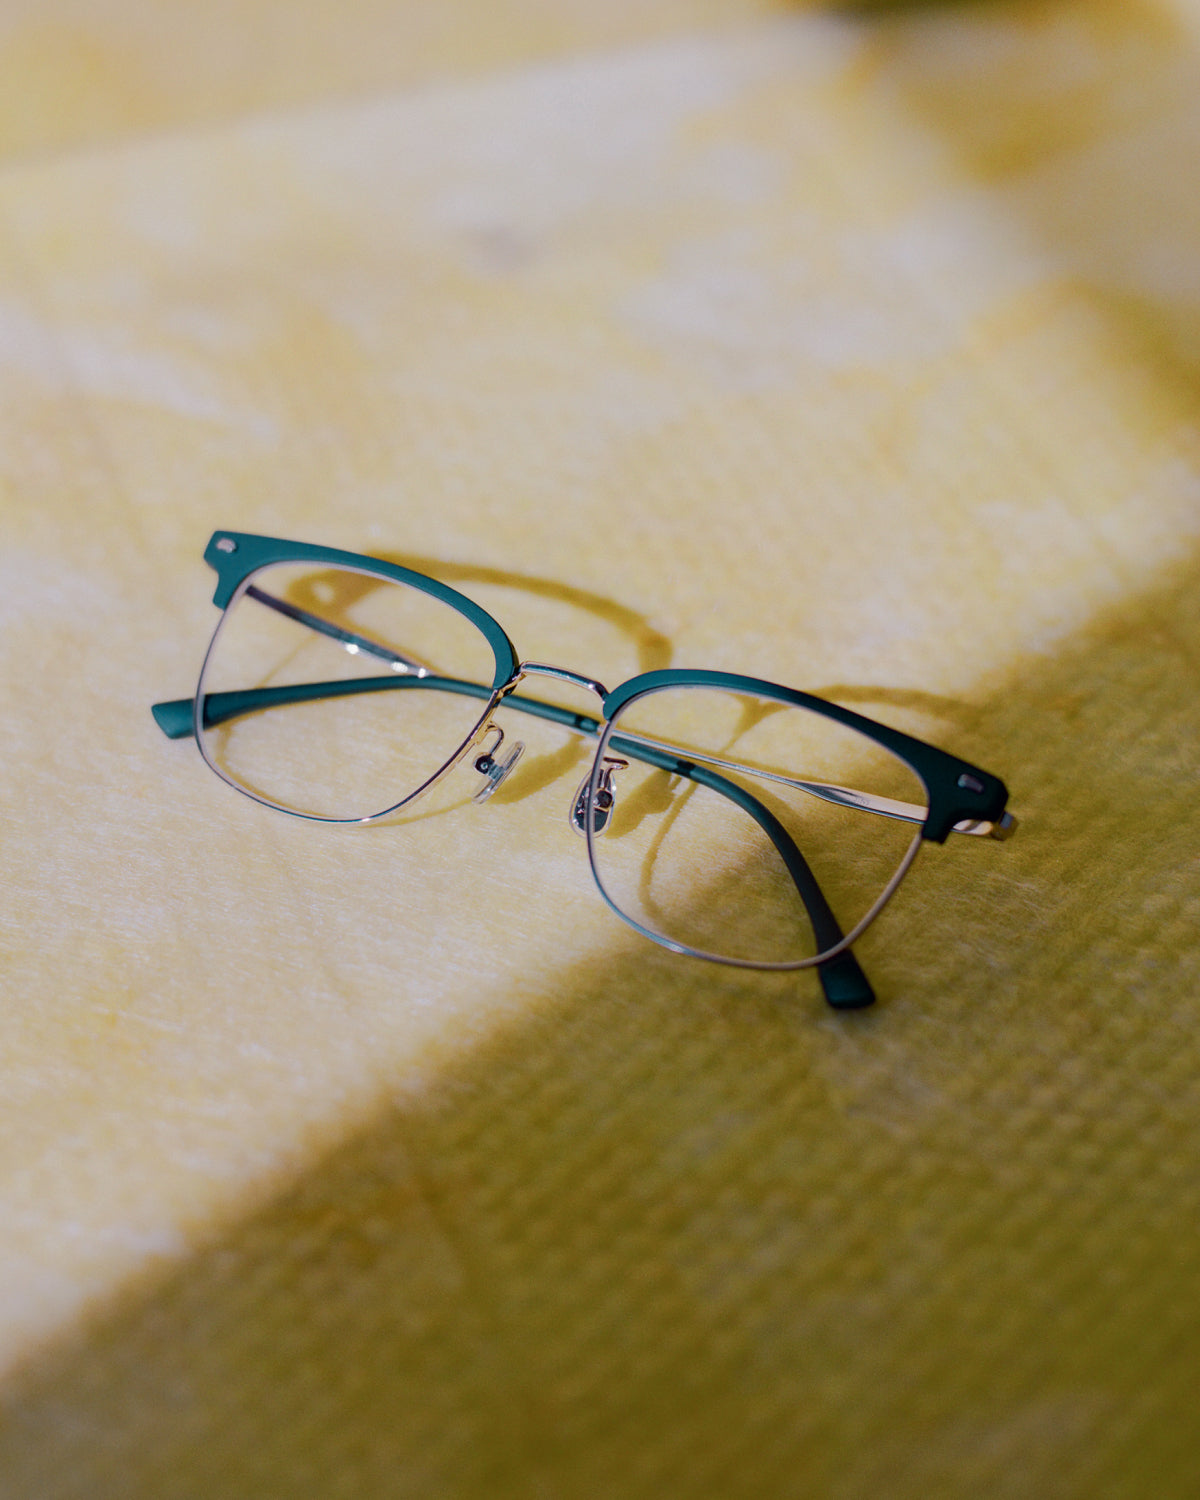 Second-hand vintage glasses for a timeless look